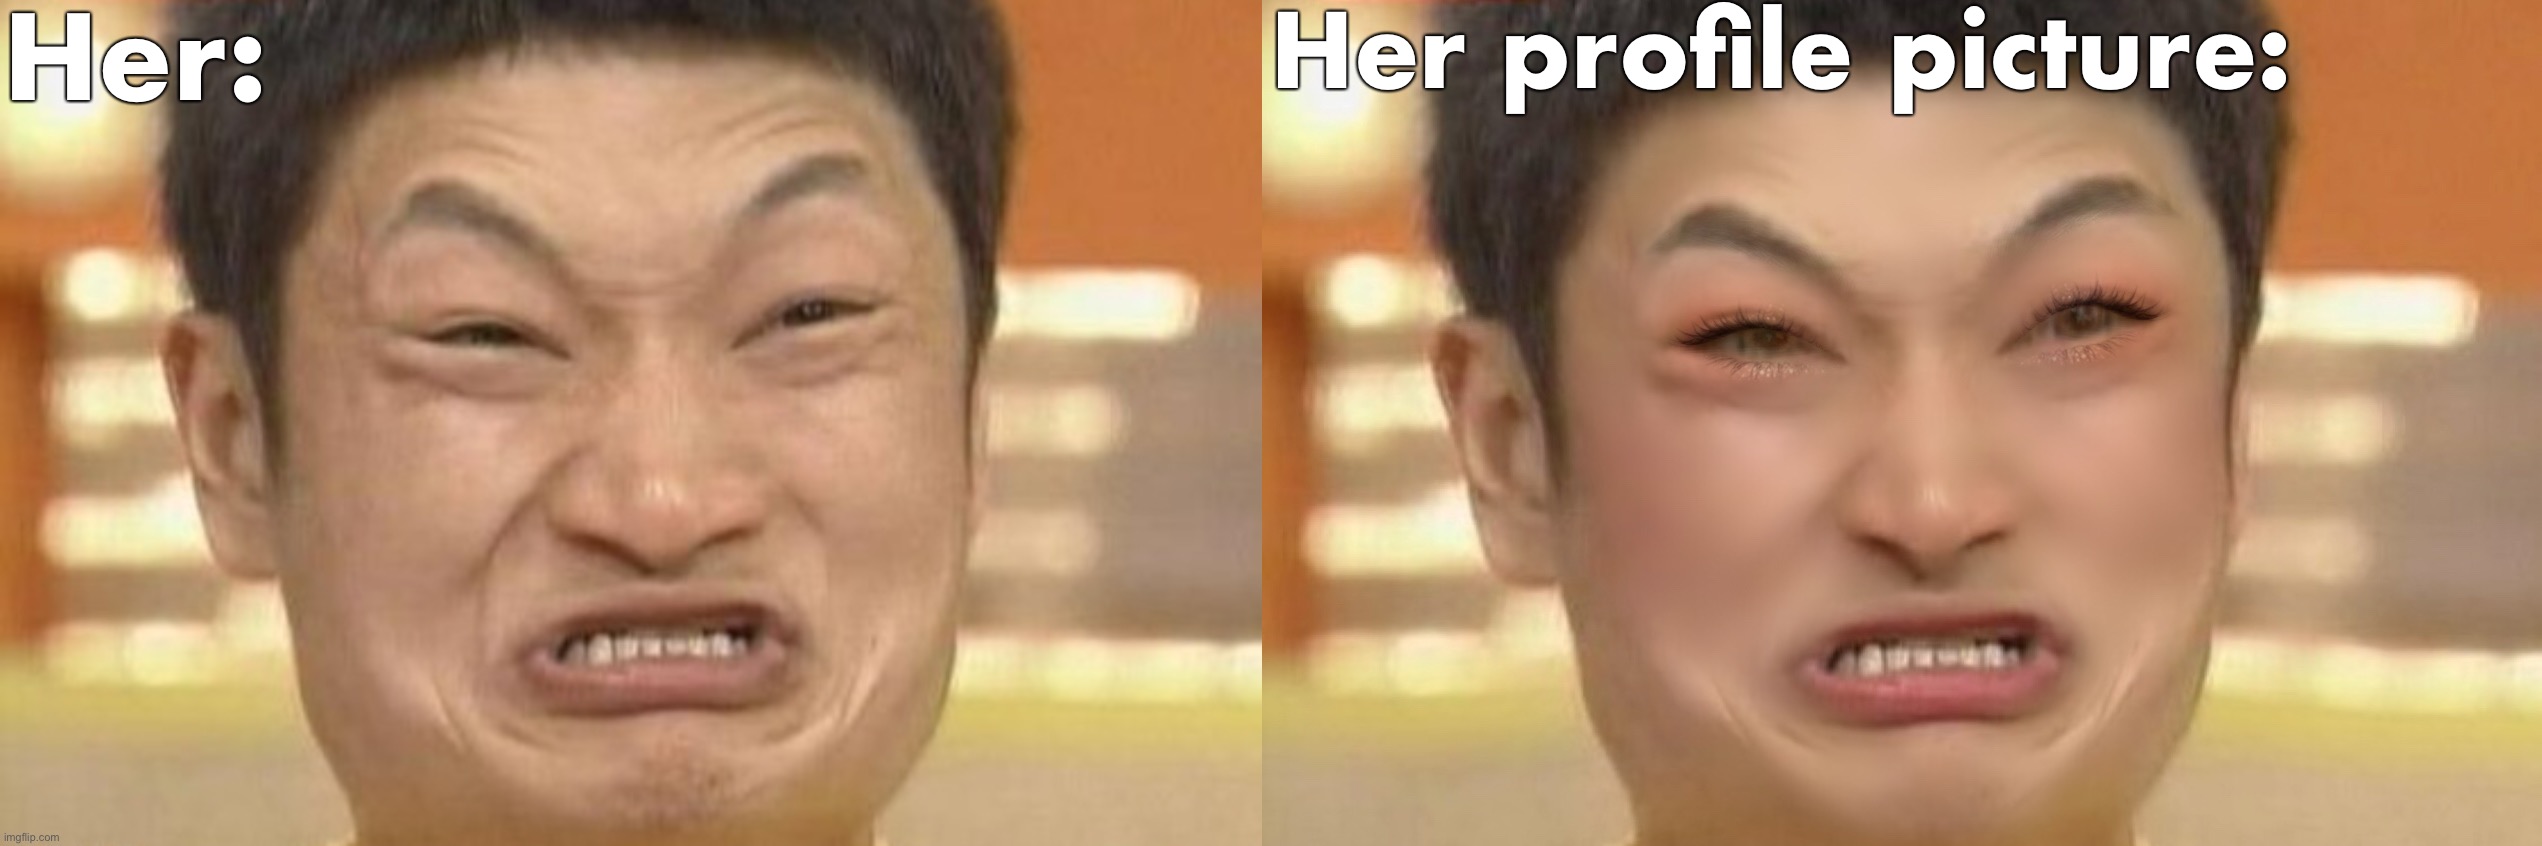 Girl Profil Picture |  Her:; Her profile picture: | image tagged in memes,girls,facebook,instagram,snapchat,tiktok | made w/ Imgflip meme maker